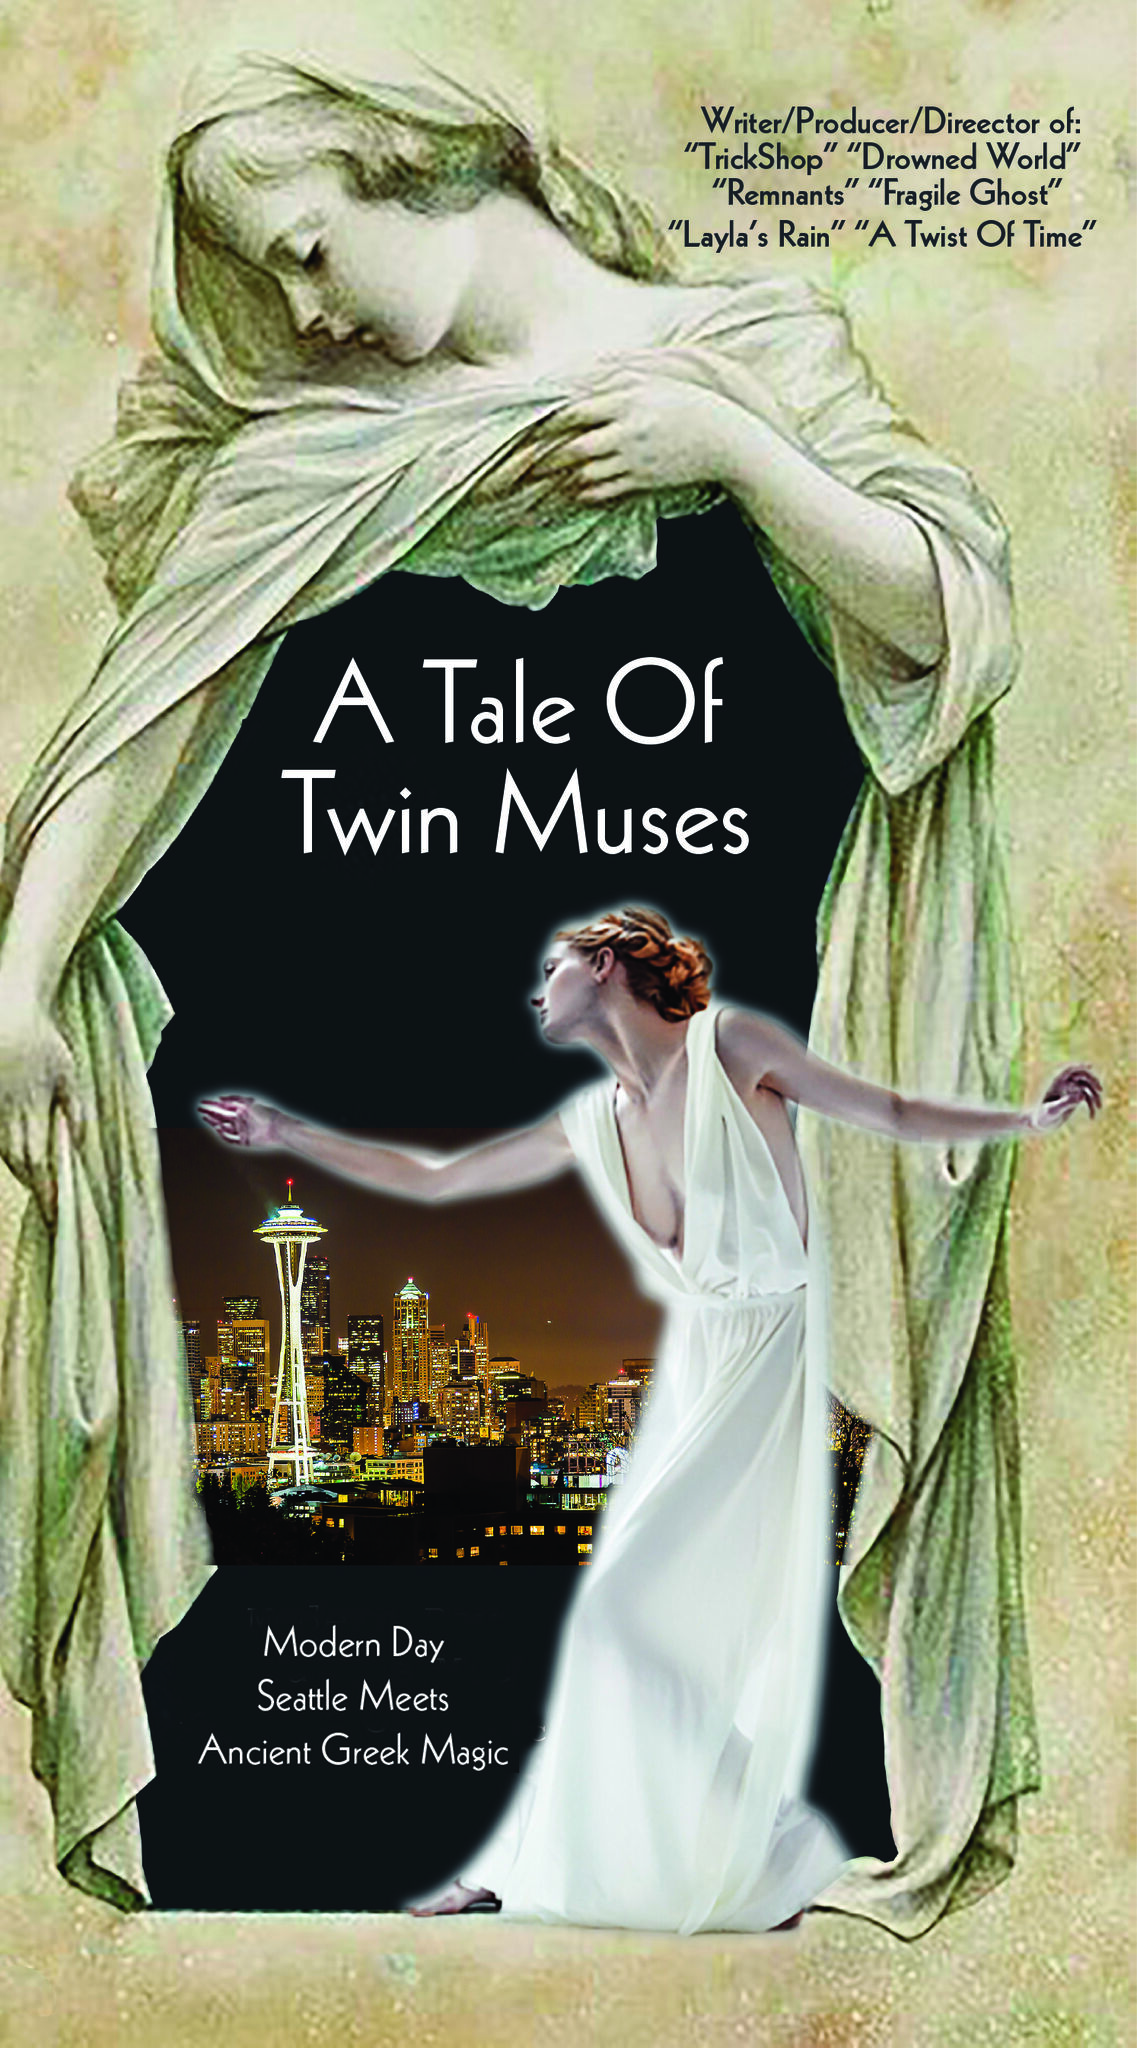 A TALE OF TWIN MUSES